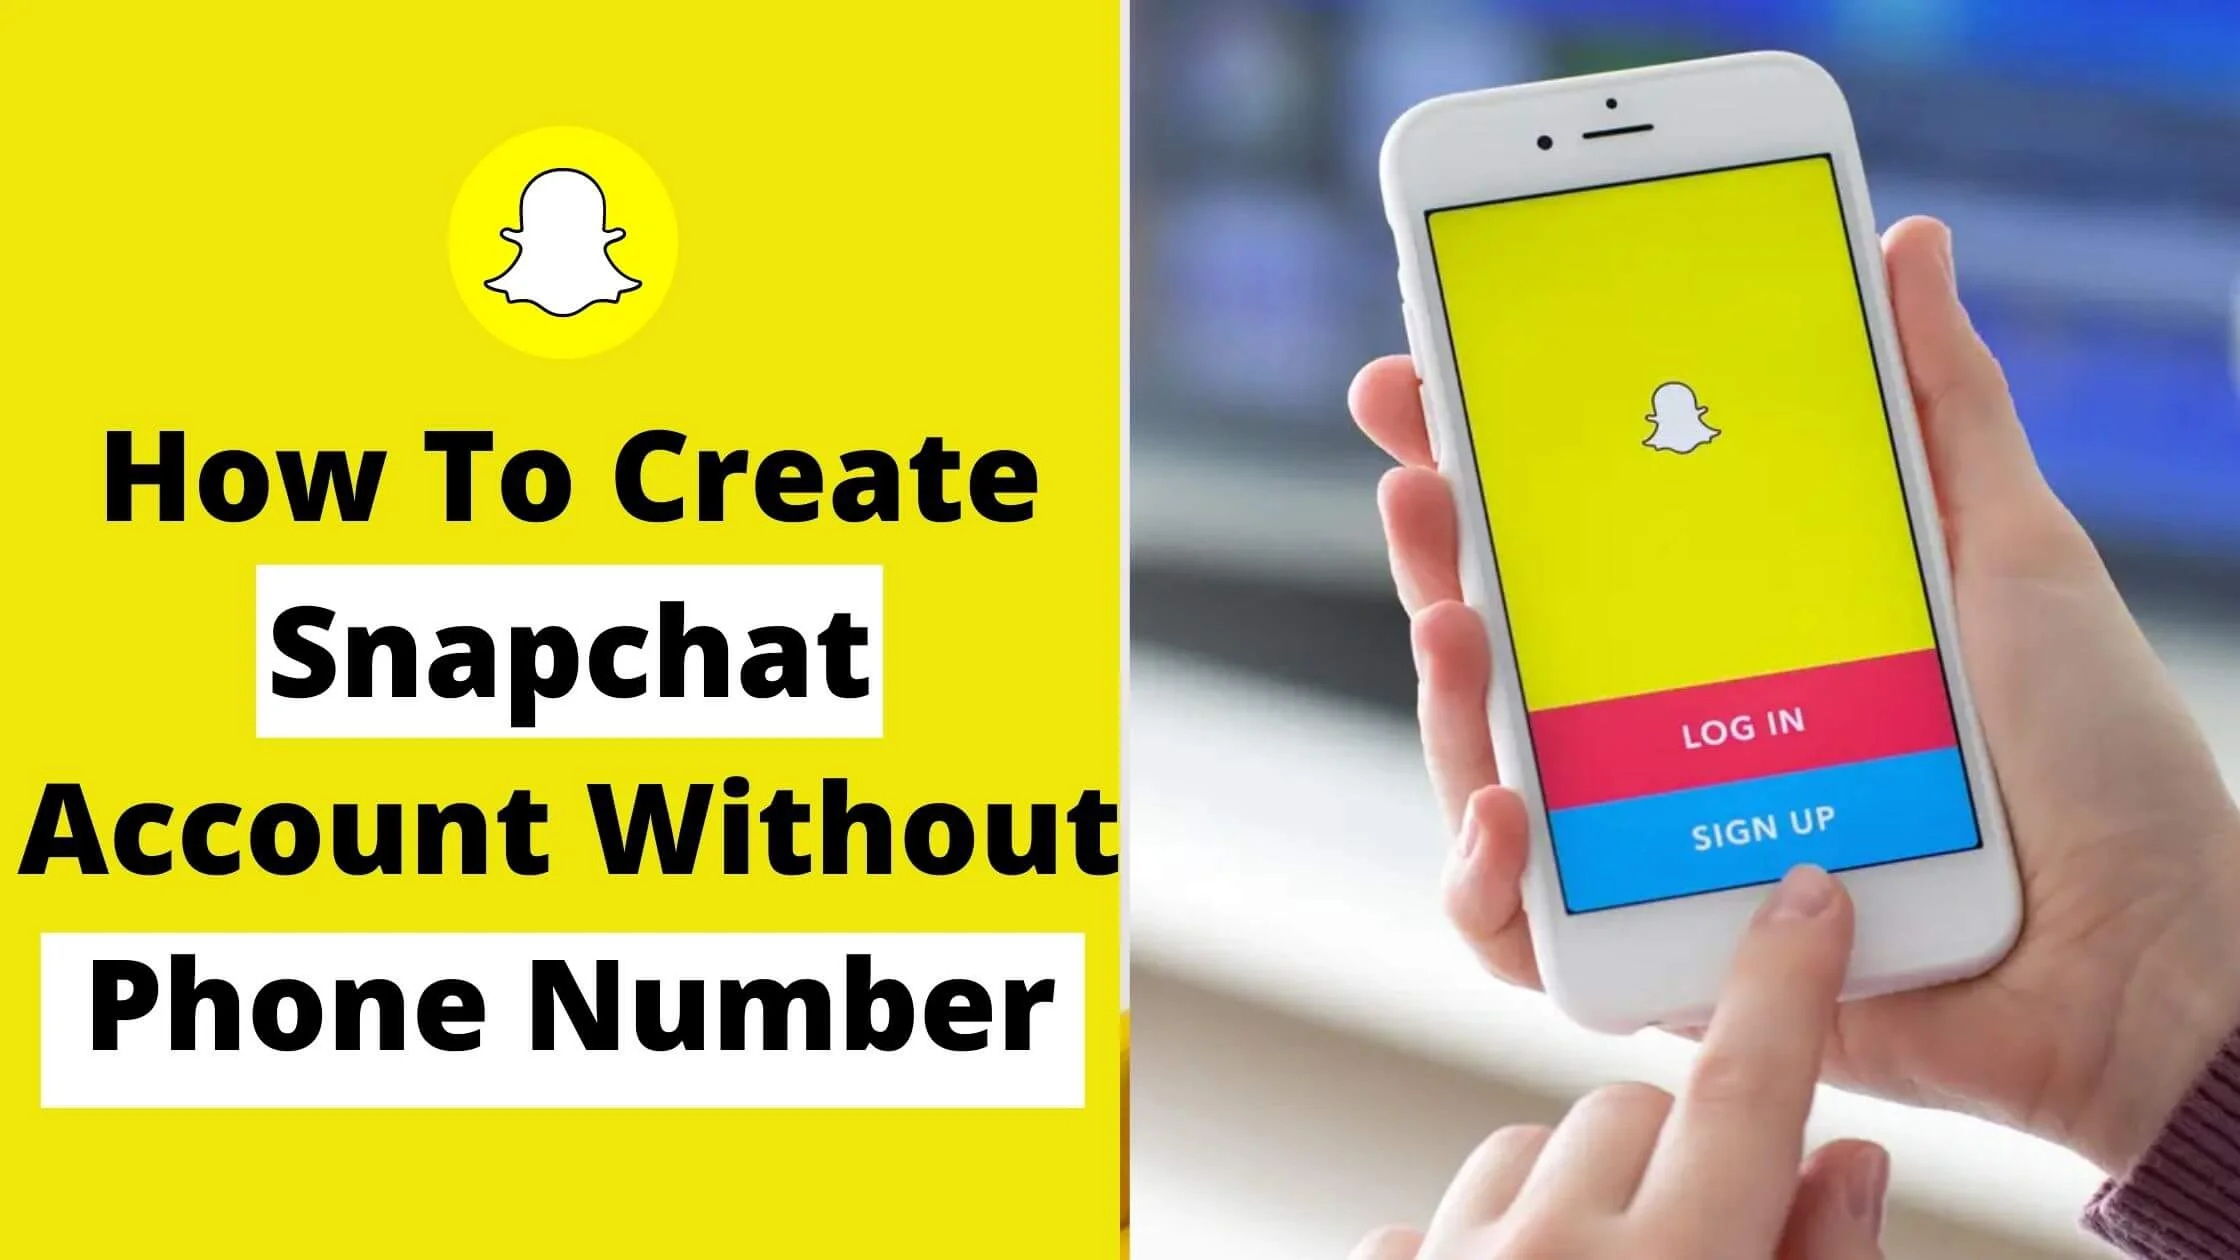 How To Create A Snapchat Account On Any Device